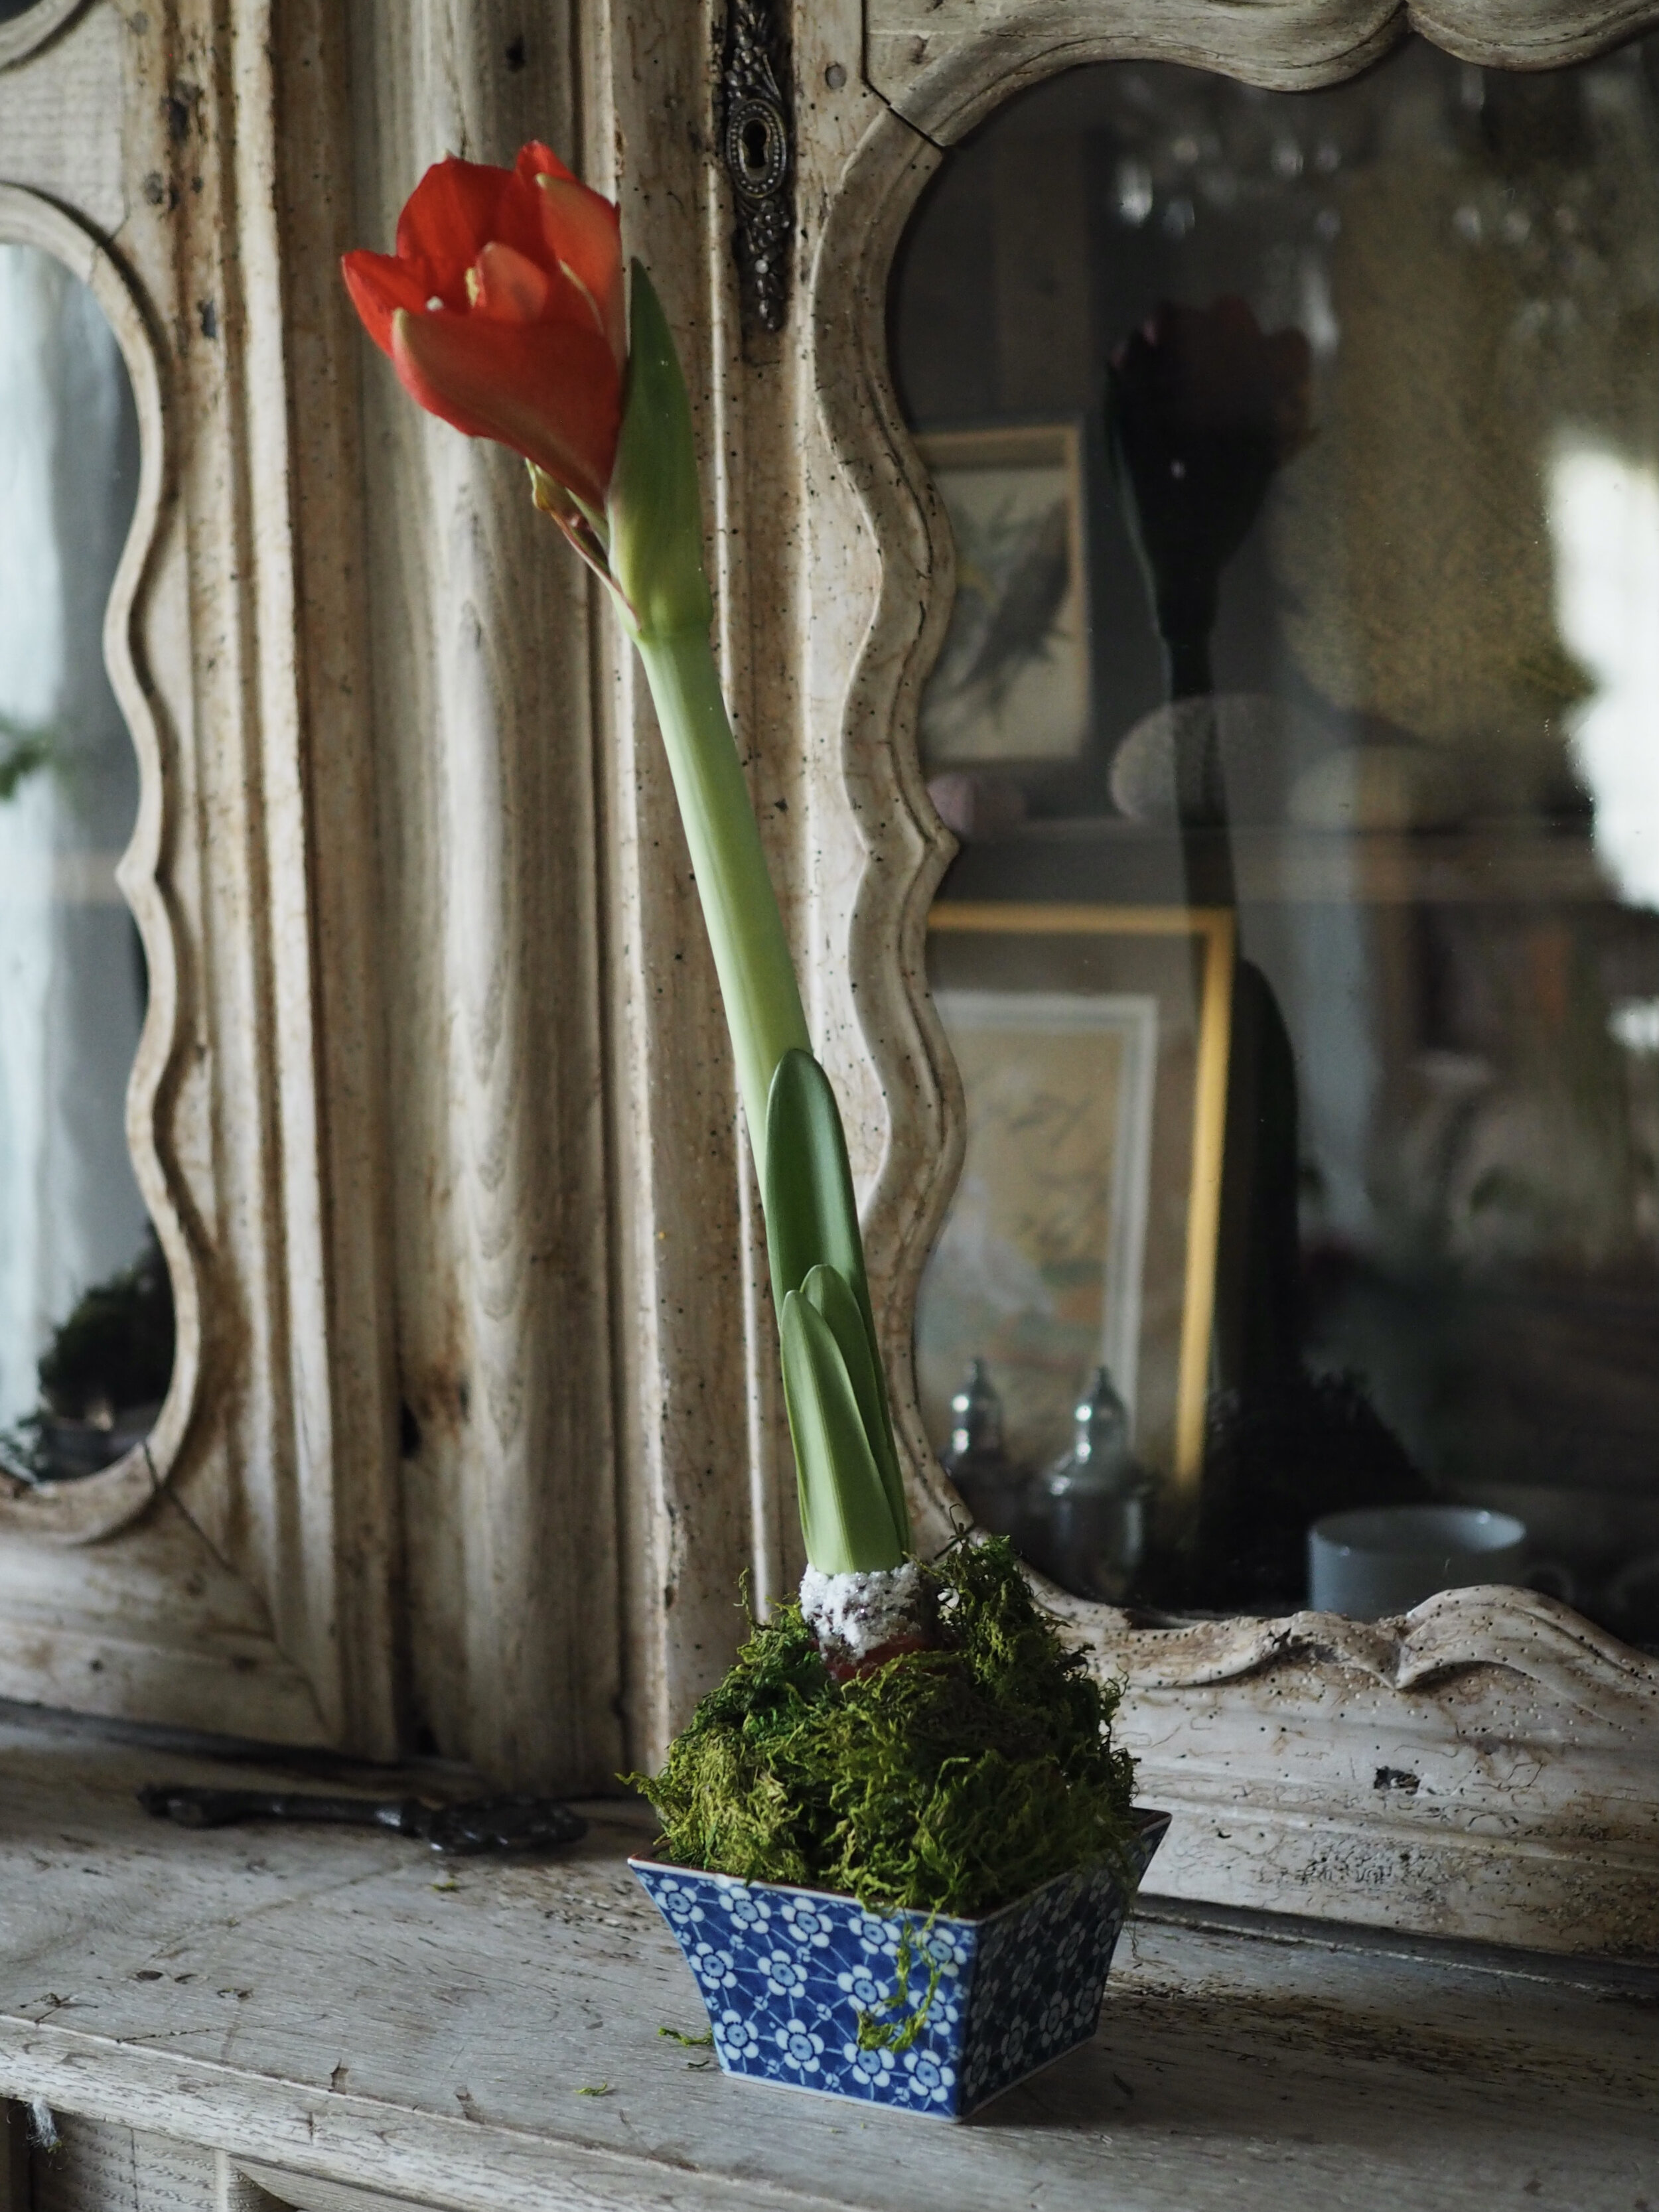 This wax-dipped amaryllis bulb needs no watering to bloom!